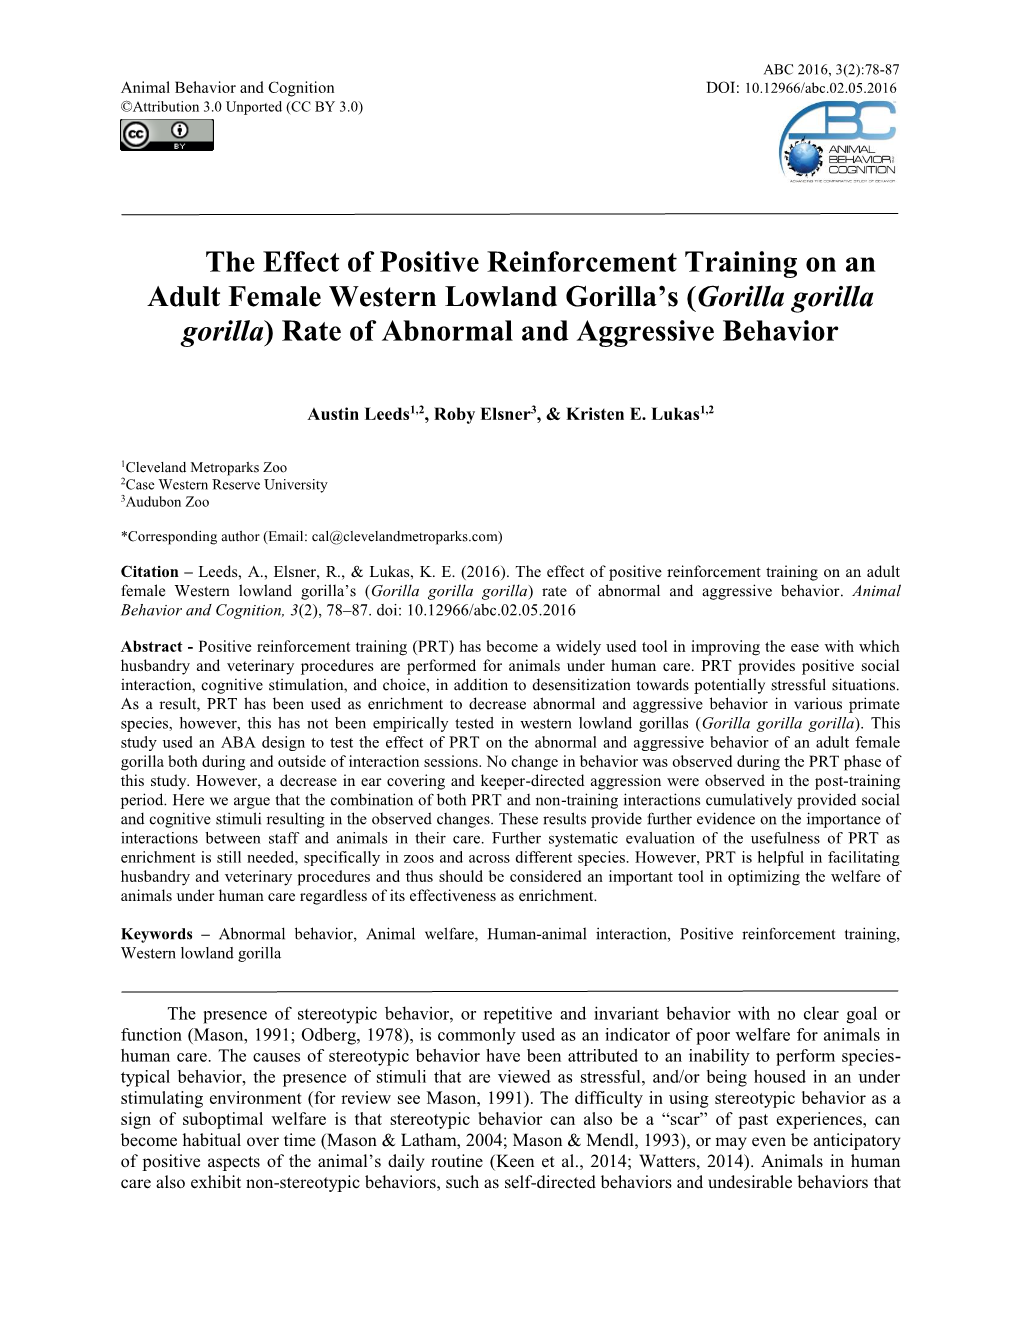 The Effect of Positive Reinforcement Training on an Adult Female Western Lowland Gorilla’S (Gorilla Gorilla Gorilla) Rate of Abnormal and Aggressive Behavior